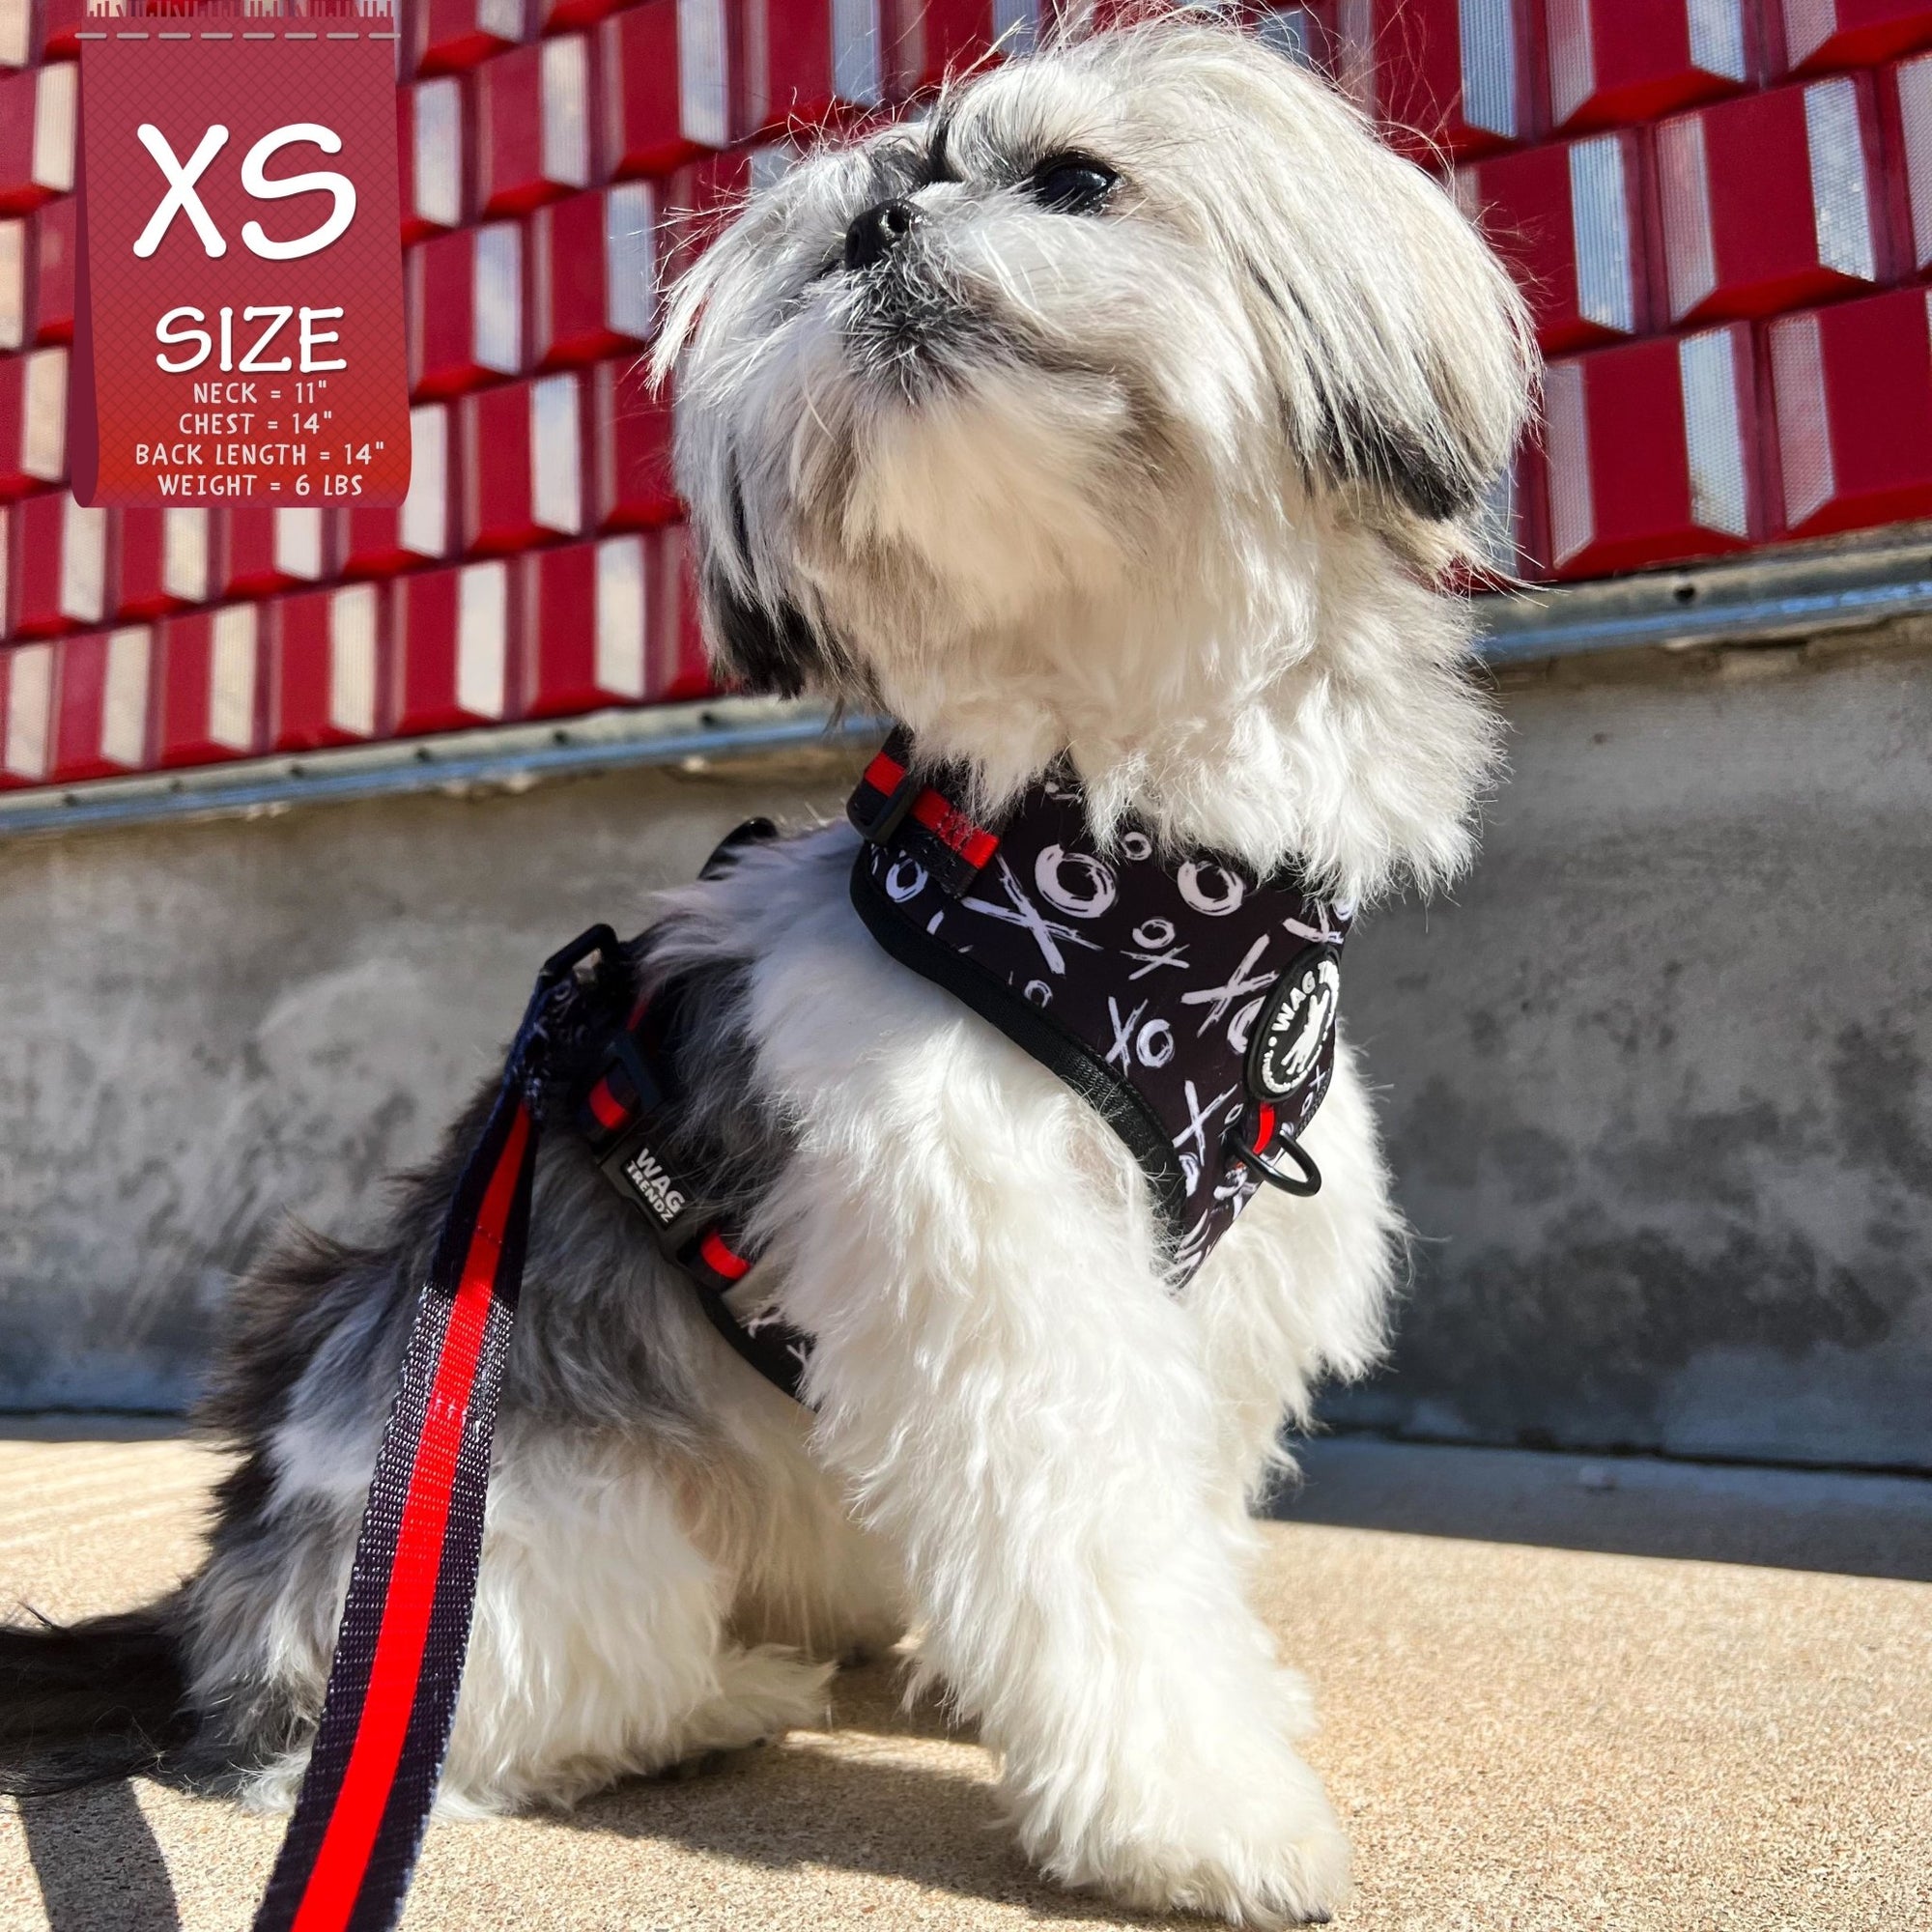 Dog Leash and Harness  Set - Shih Tzu mix wearing XS Dog Adjustable Harness with black and white XO&#39;s with bold red accents with matching leash - sitting outdoors in front of a gray and red wall - Wag Trendz